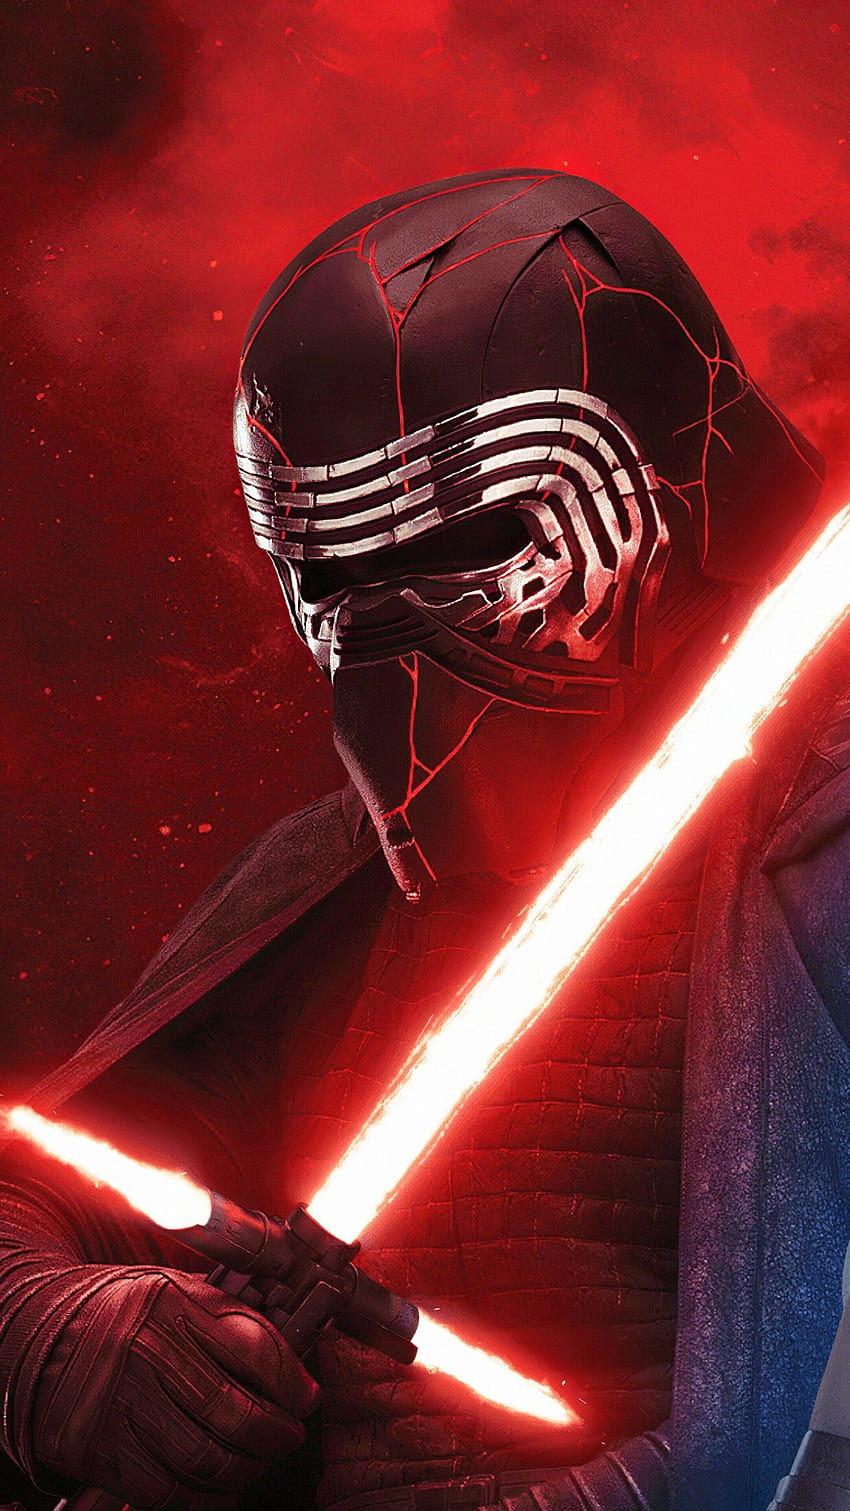 324327 Kylo Ren, Rey, Star Wars The Rise of Skywalker, Poster, phone , Backgrounds, and, kylo ren iphone HD電話の壁紙